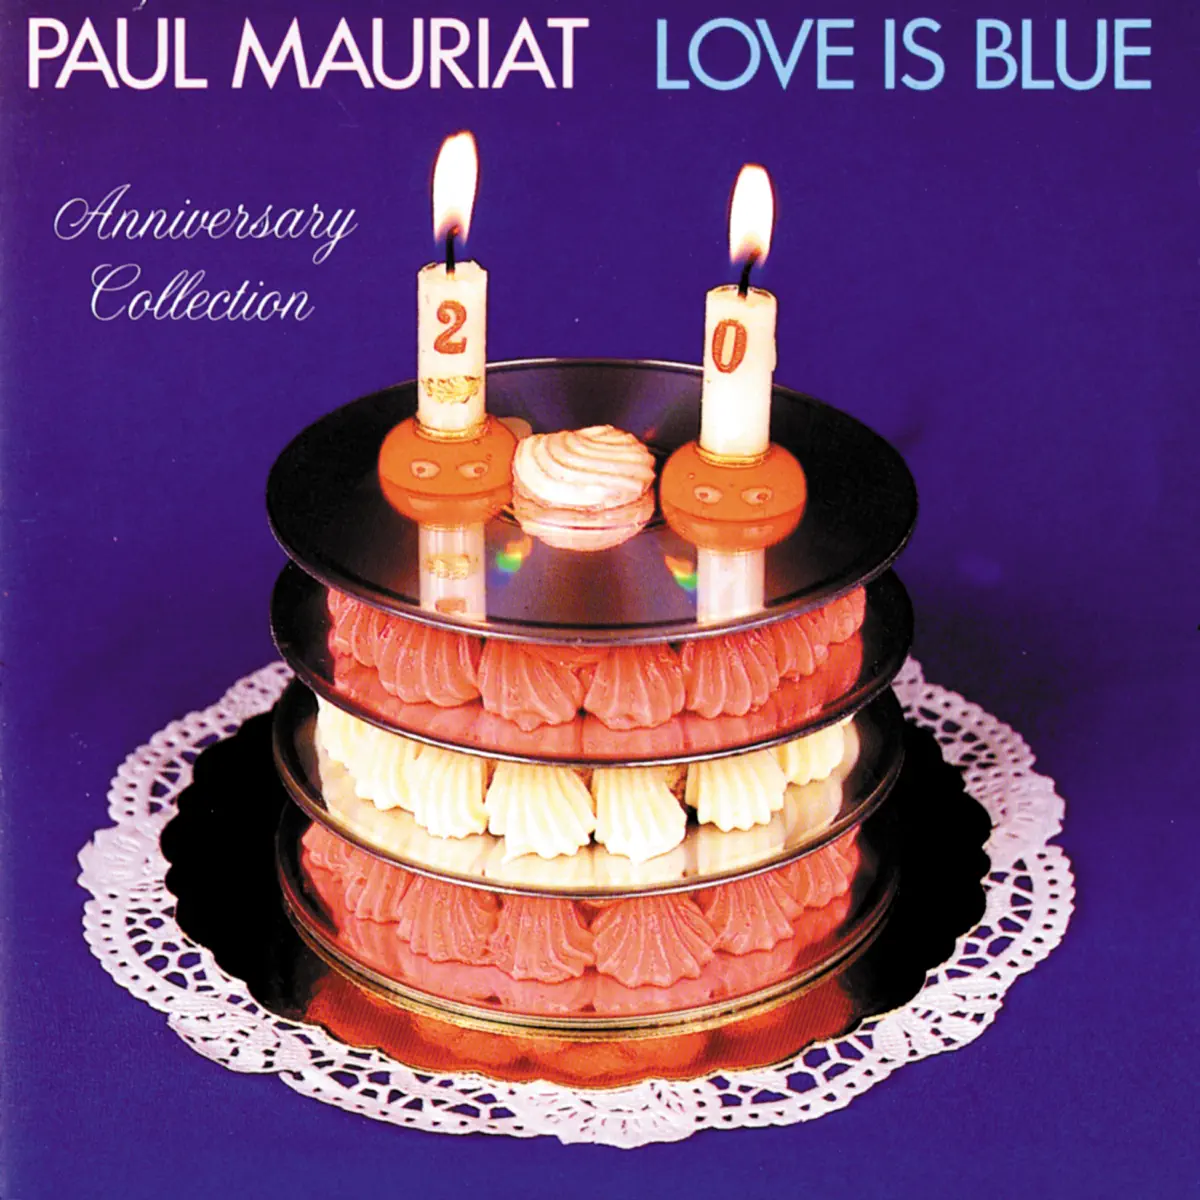 Paul Mauriat - Love Is Blue (Anniversary Collection) (1988) [iTunes Plus AAC M4A]-新房子